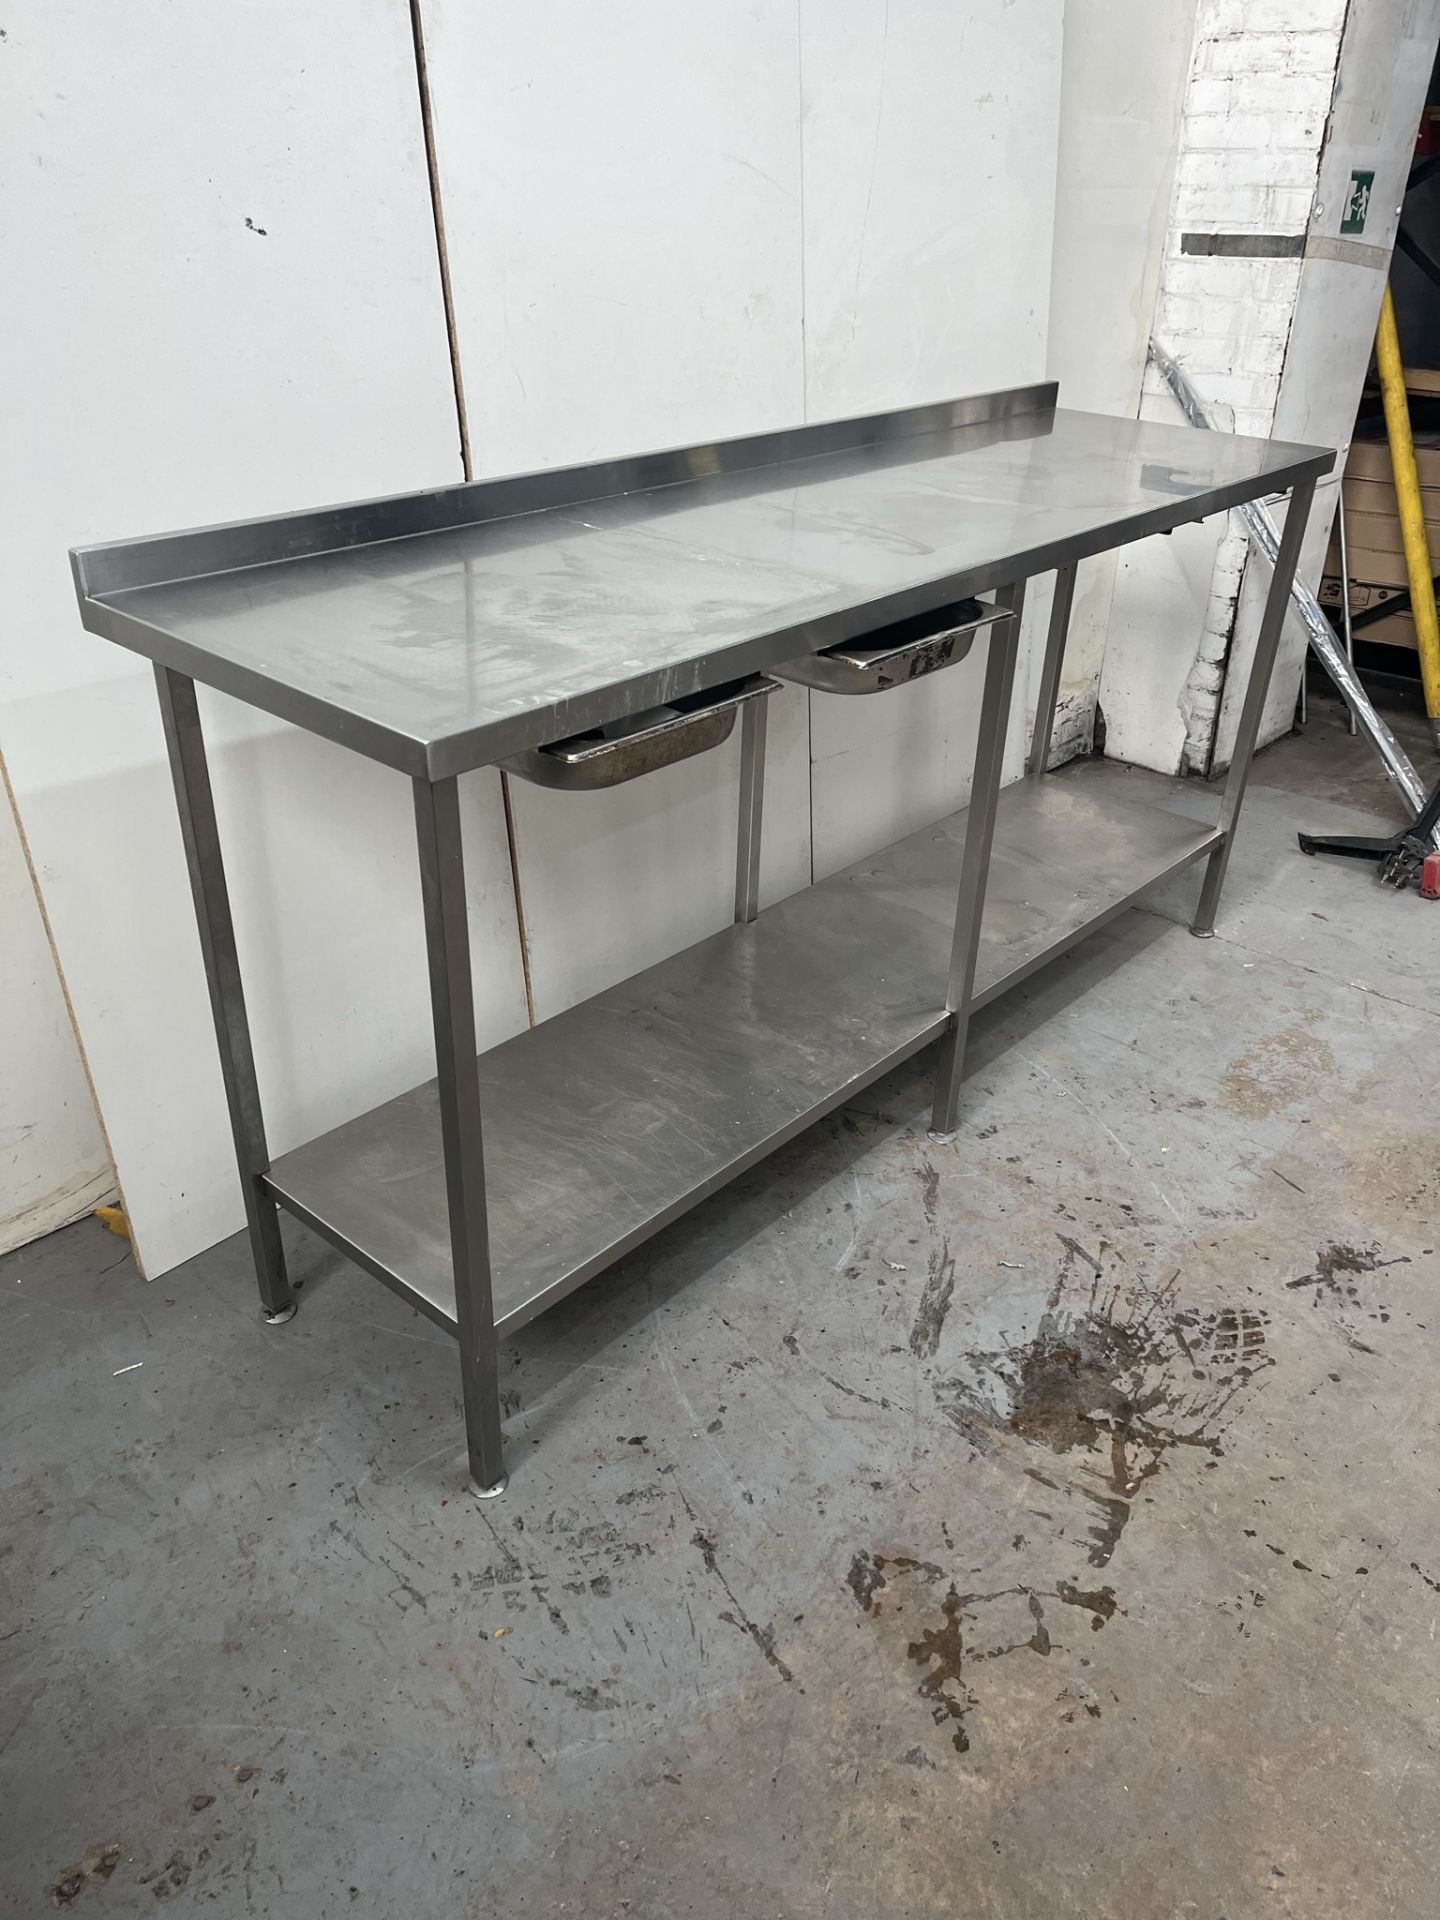 Commercial Stainless Steel Catering Table With Bottom Shelf & Trays - Image 3 of 14